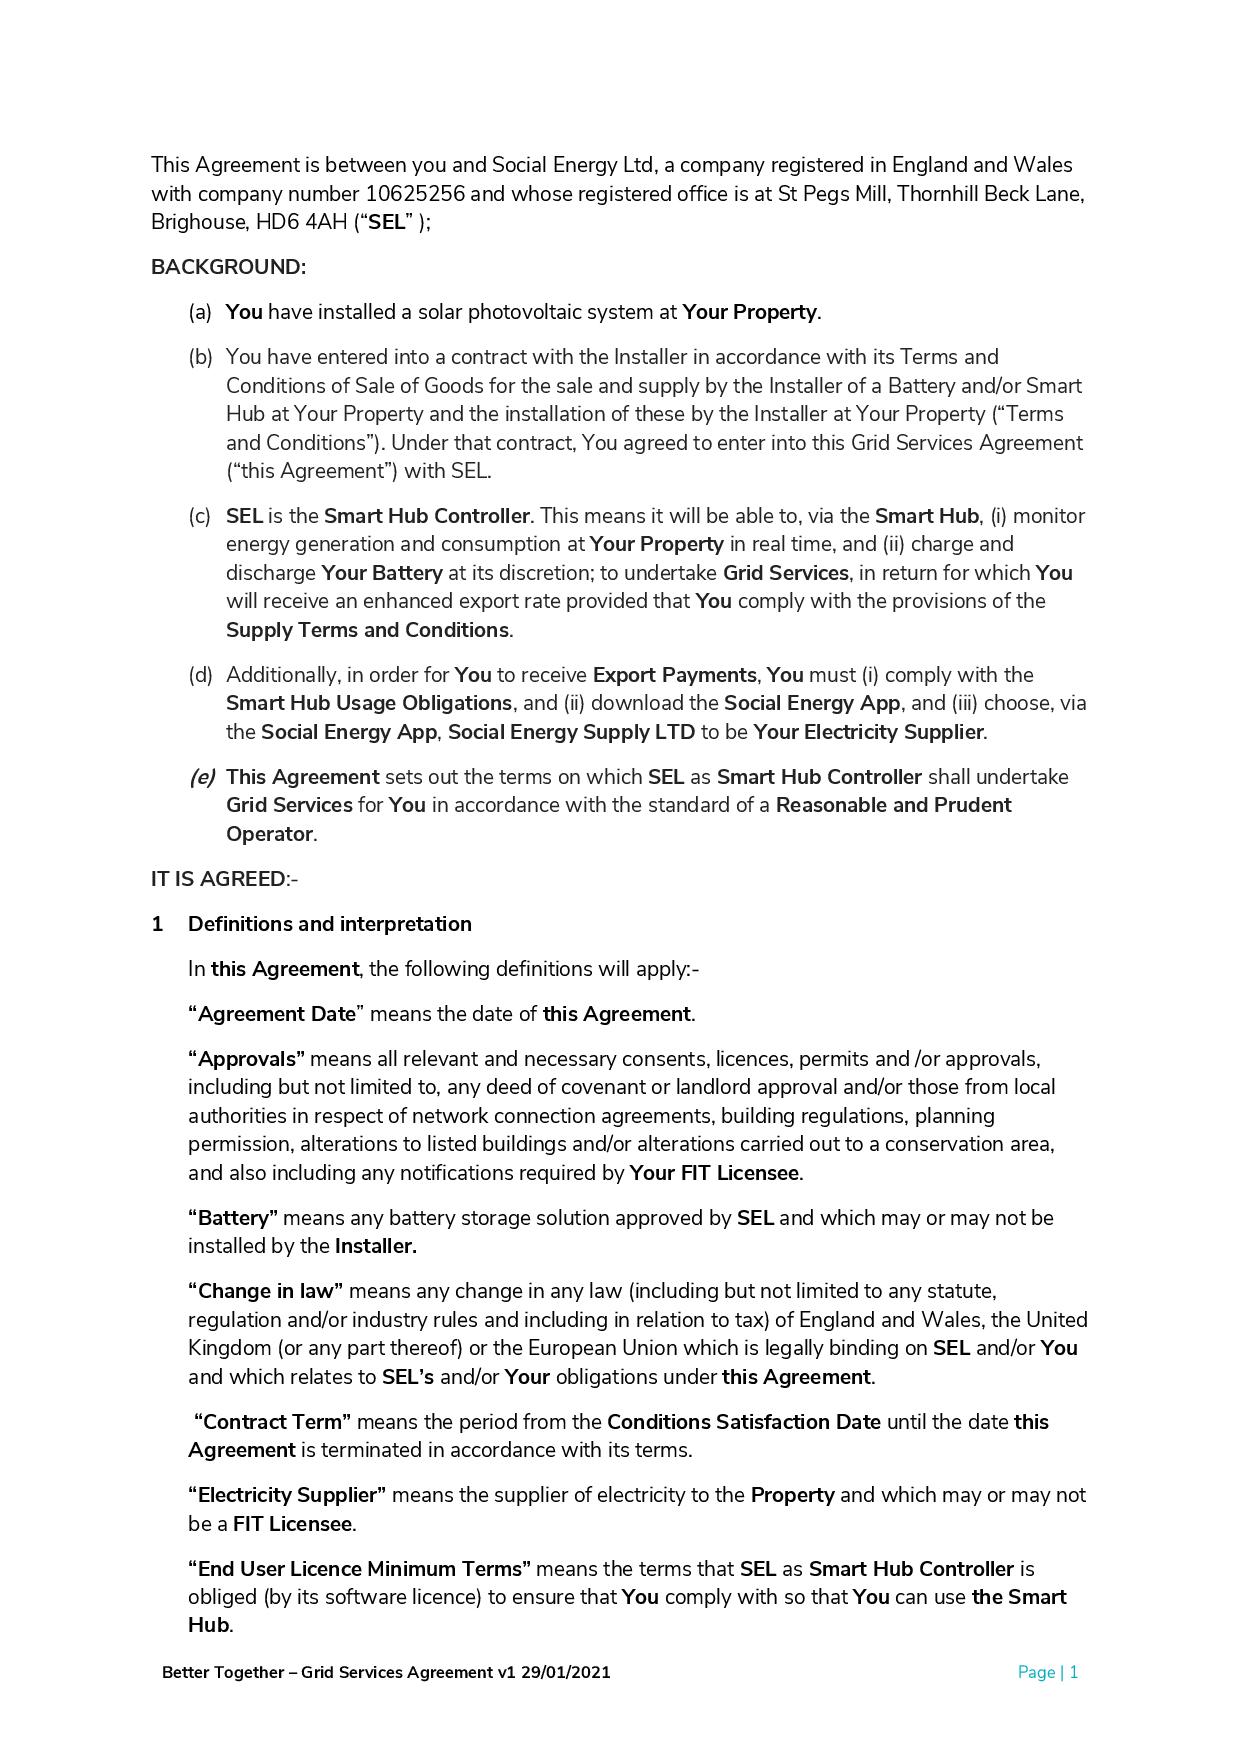 Better_Together_-_Grid_Services_Agreement-page-002.jpg